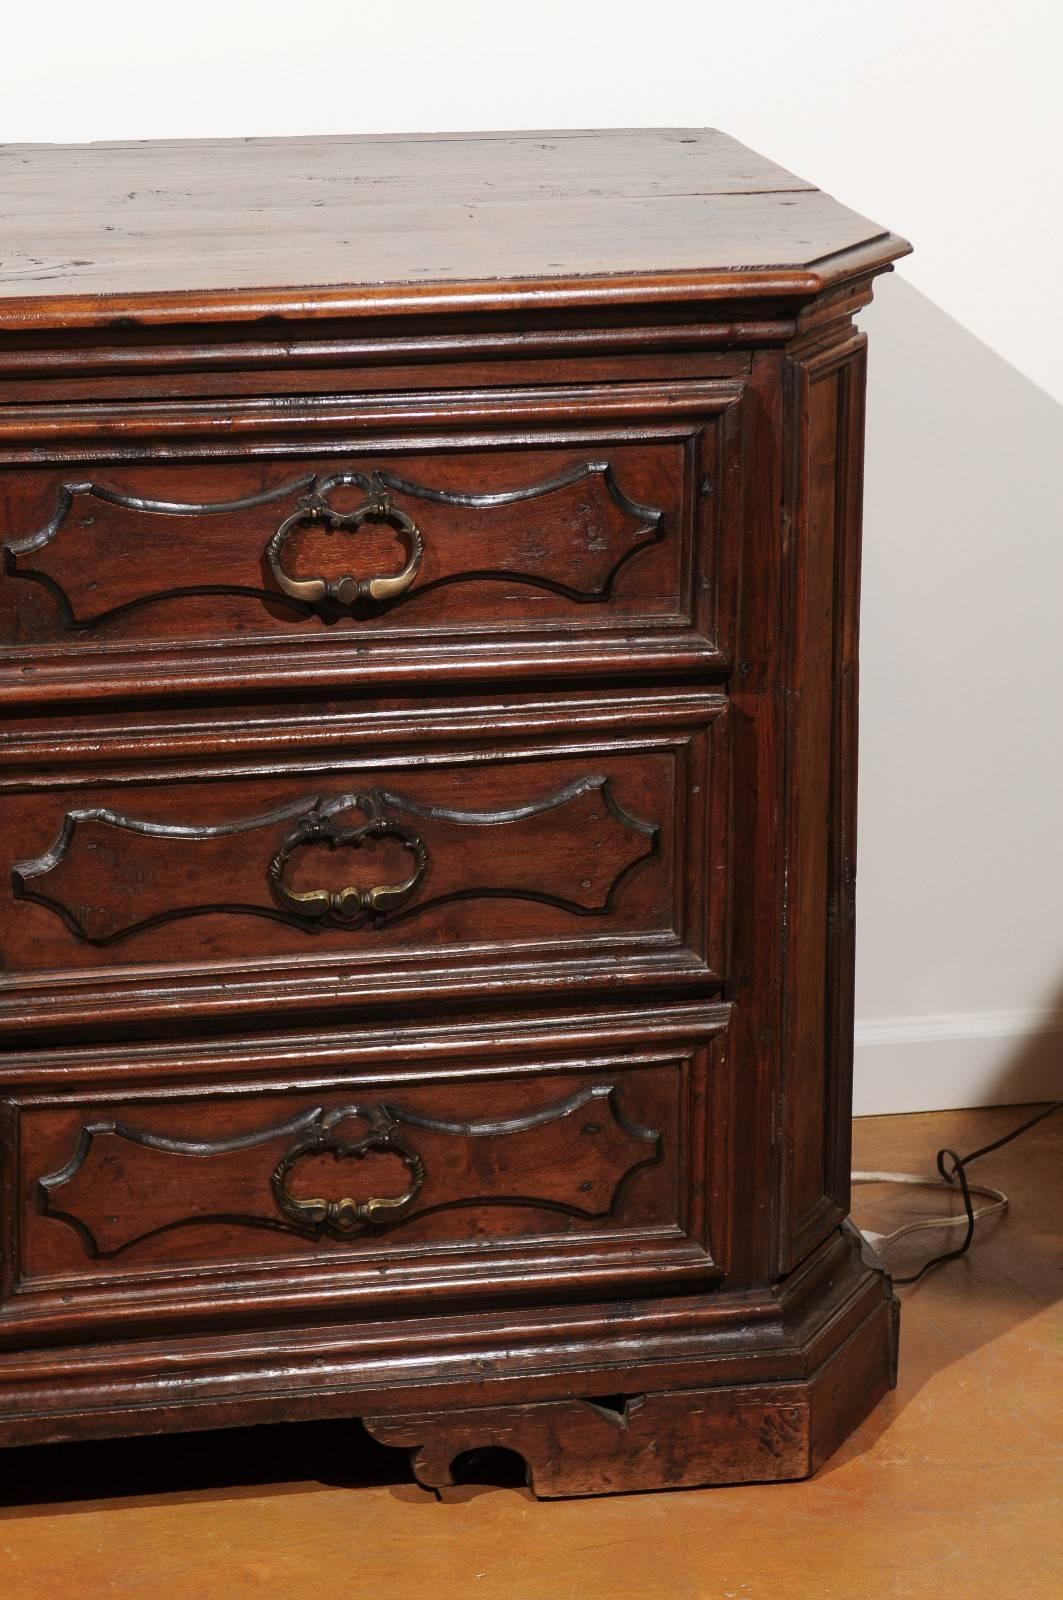 19th Century Italian 1850s Walnut Three-Drawer Commode with Cartouches and Diamond Motifs